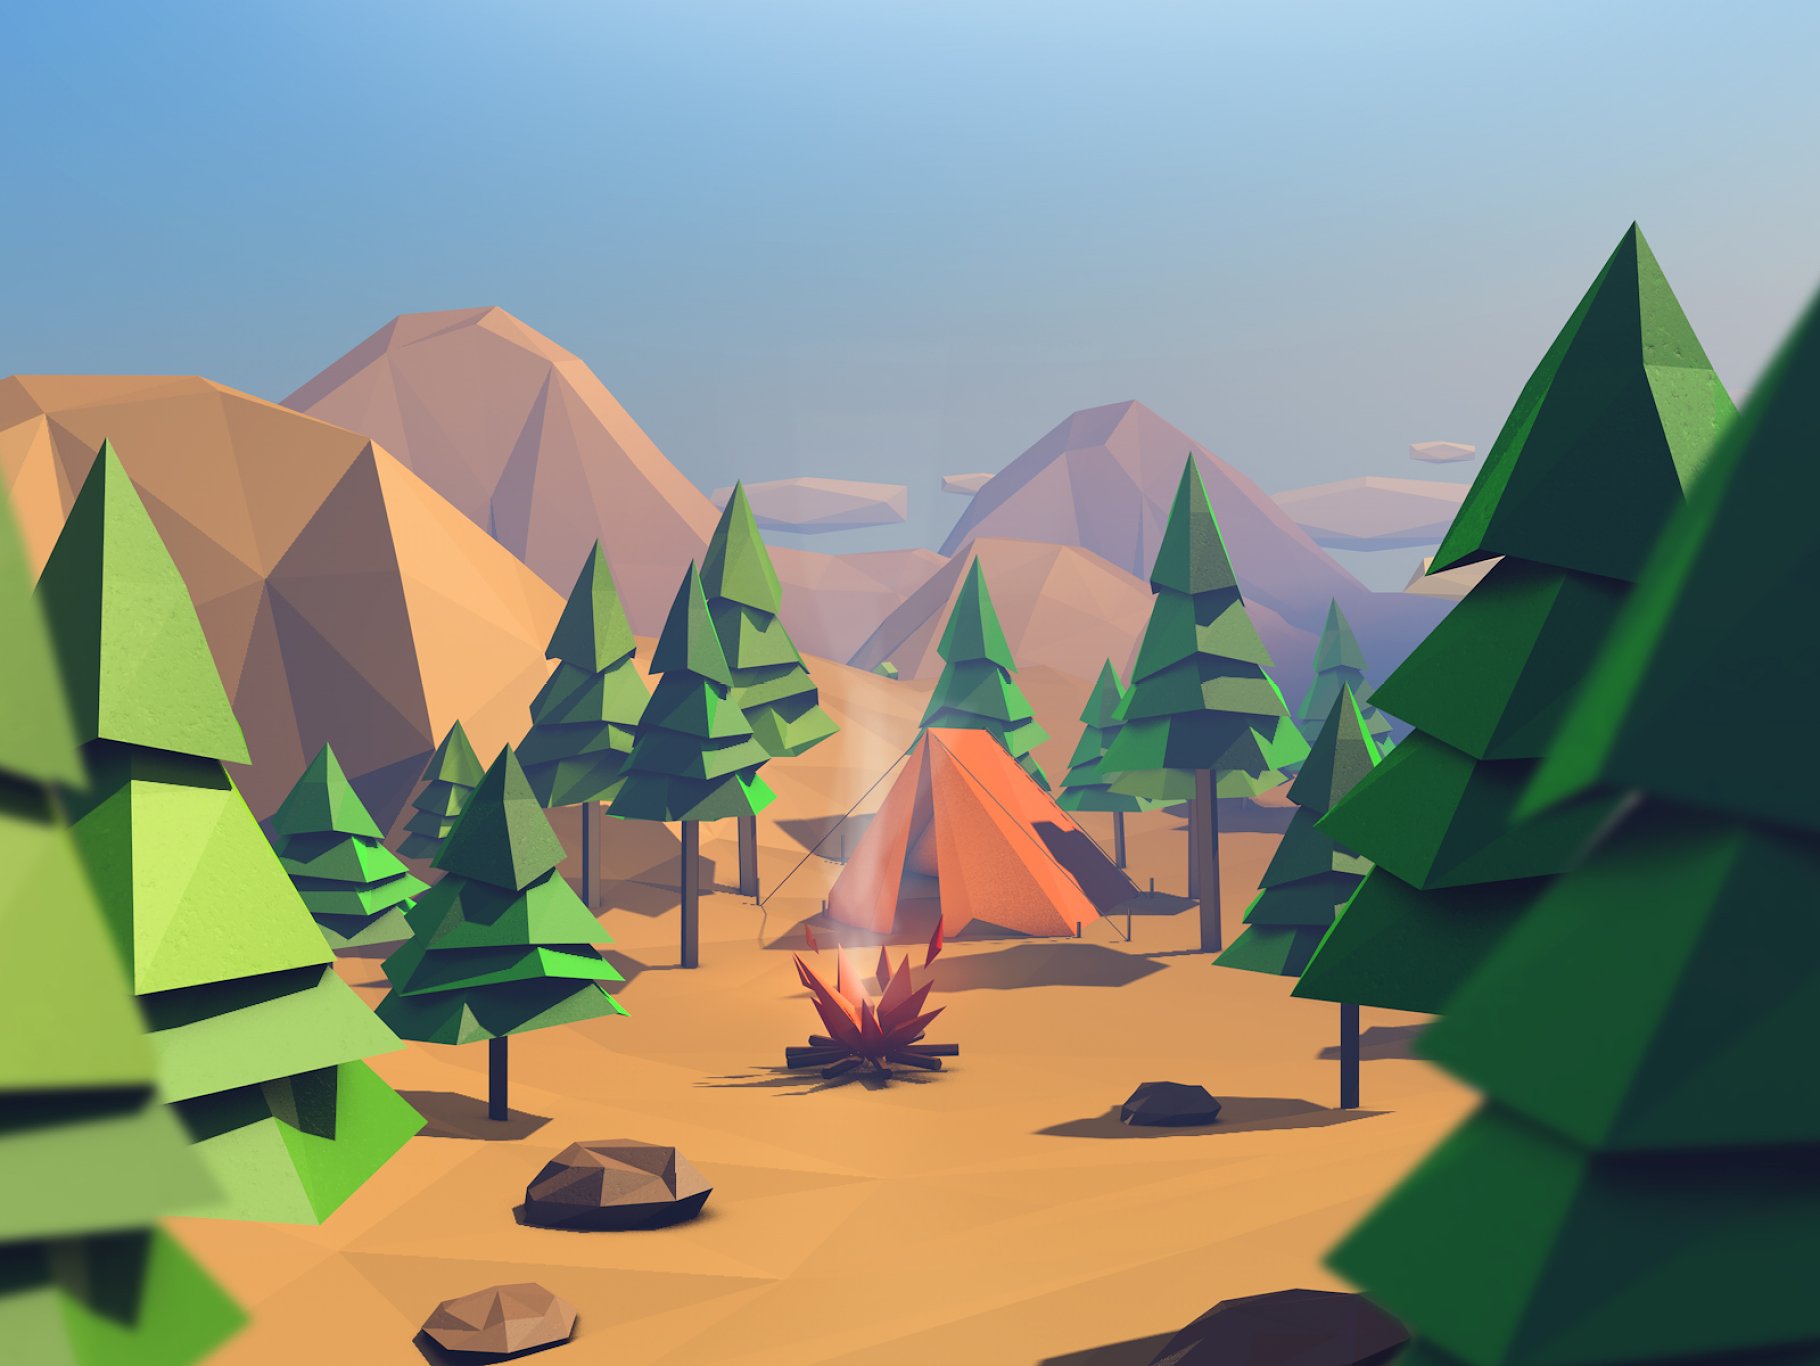 Prerender of an island with a forest and a campfire.